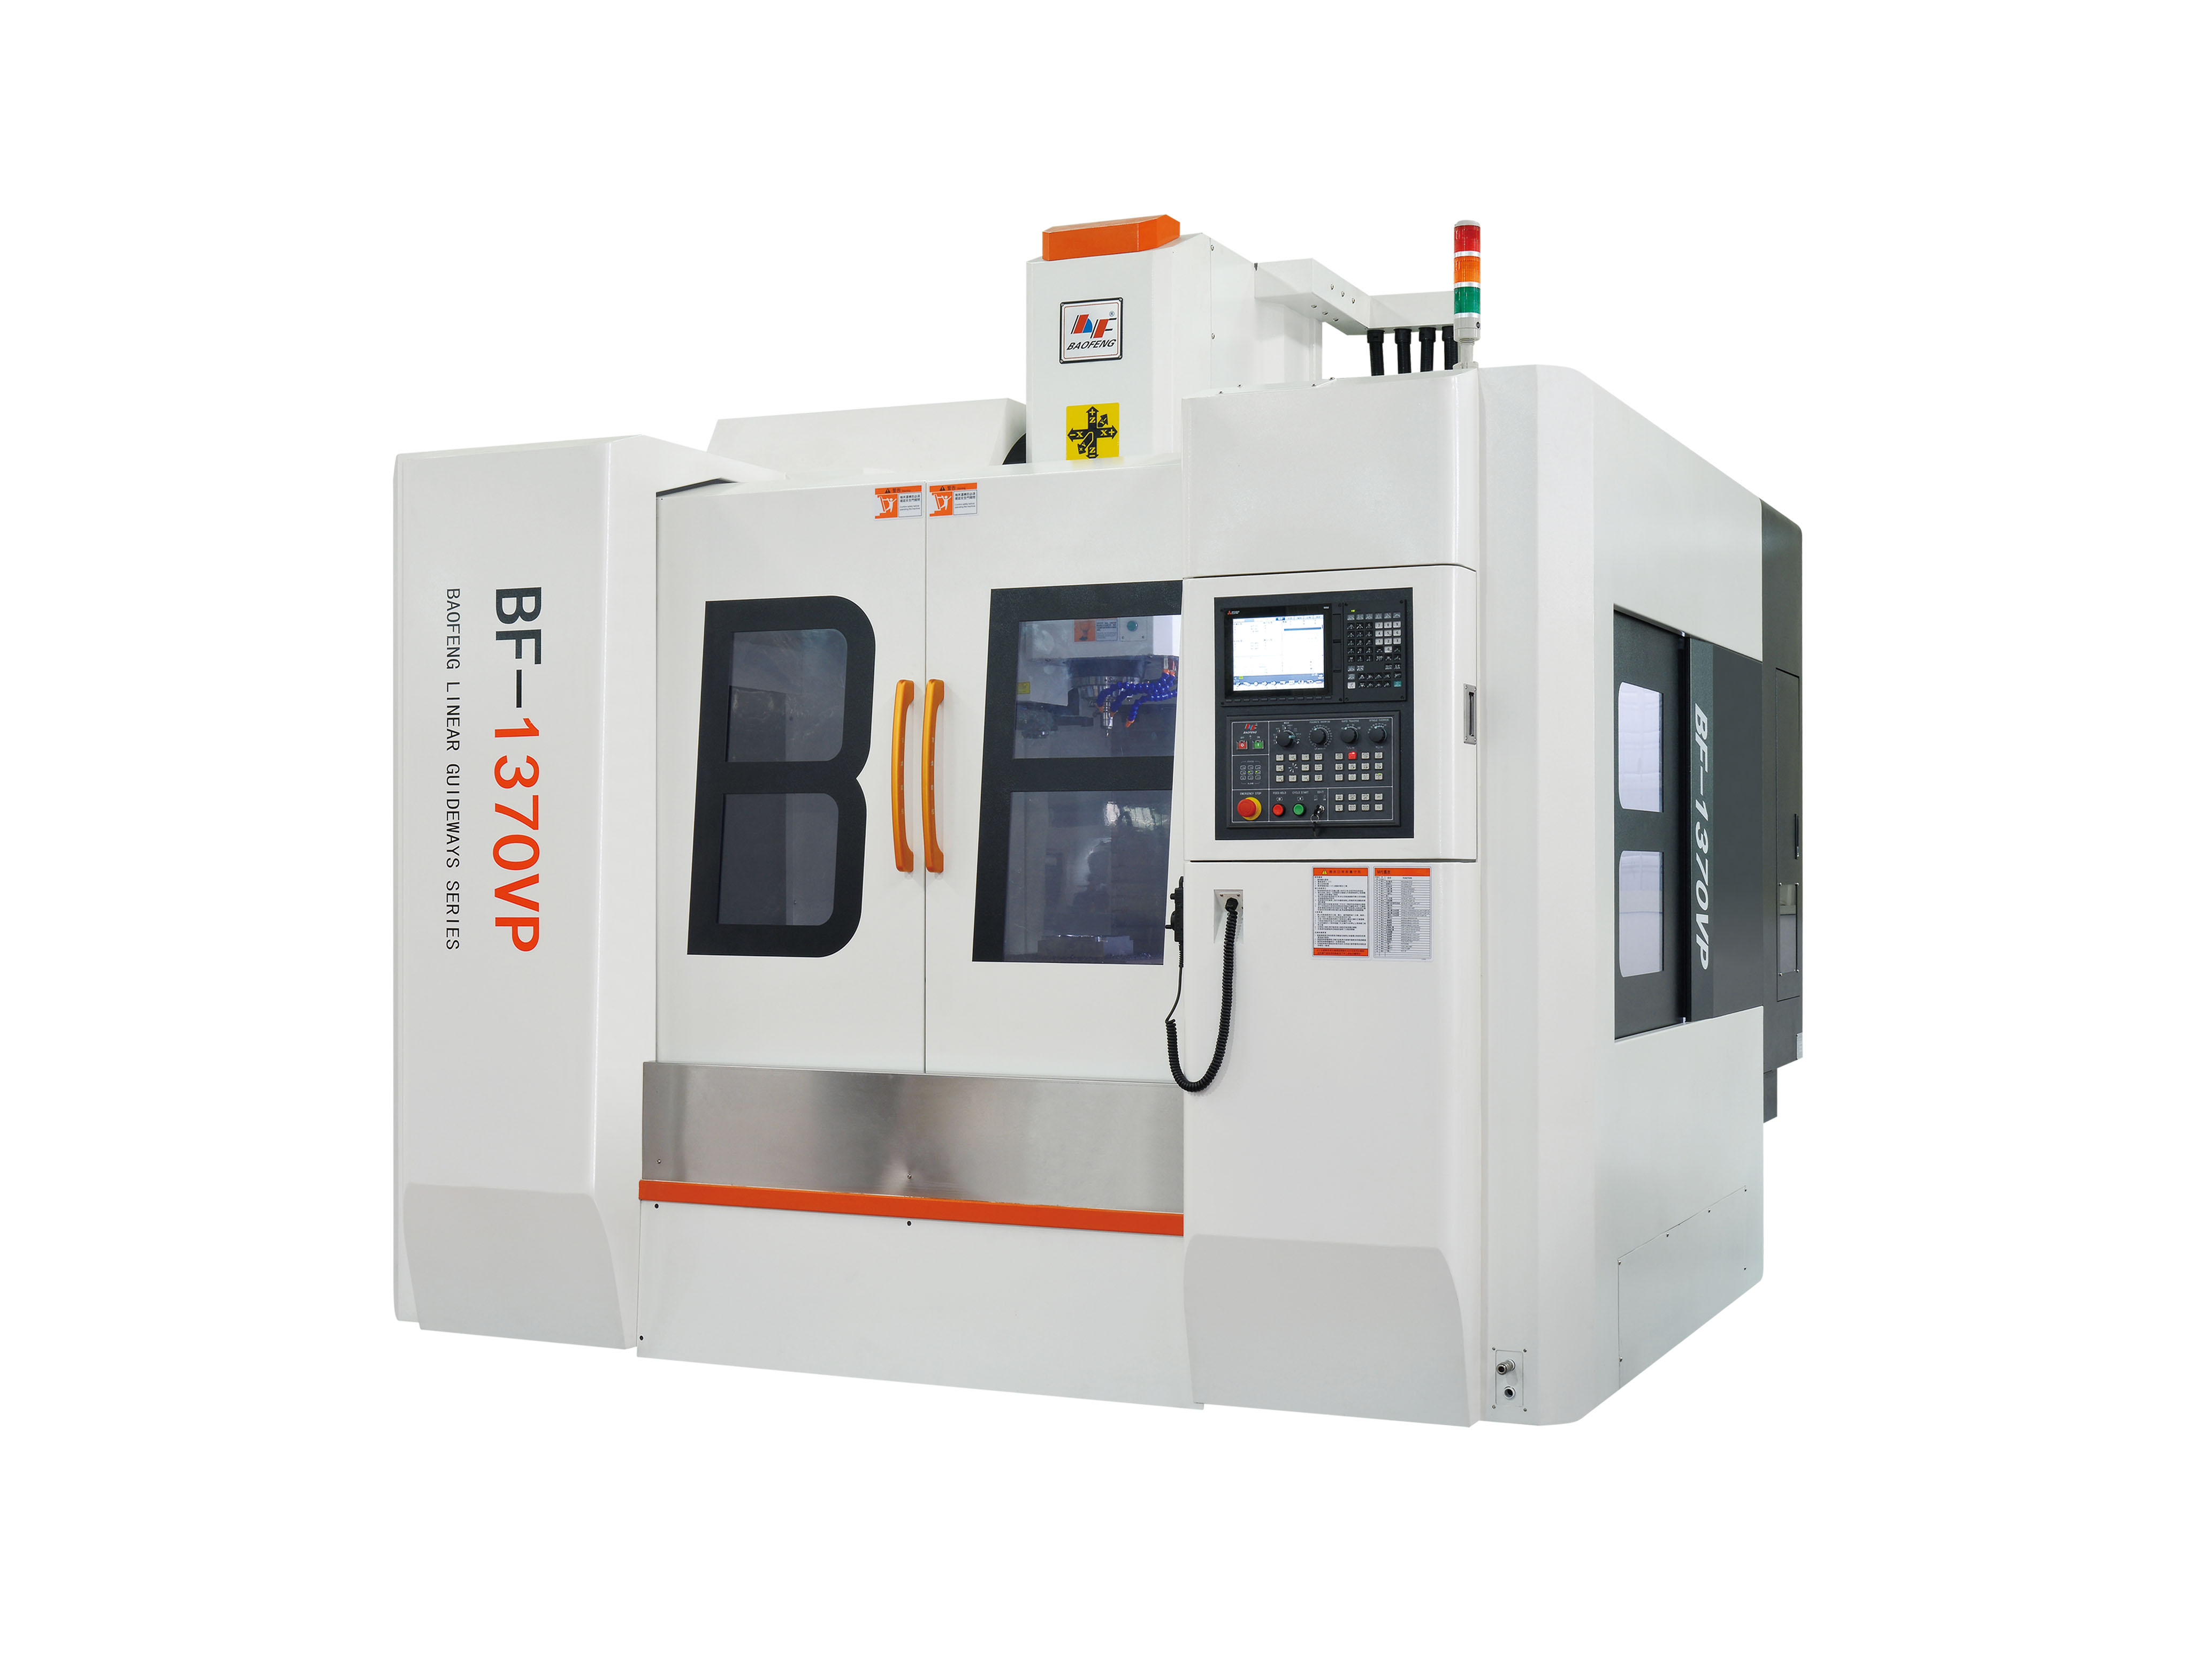 Does CNC machining center have development potential?